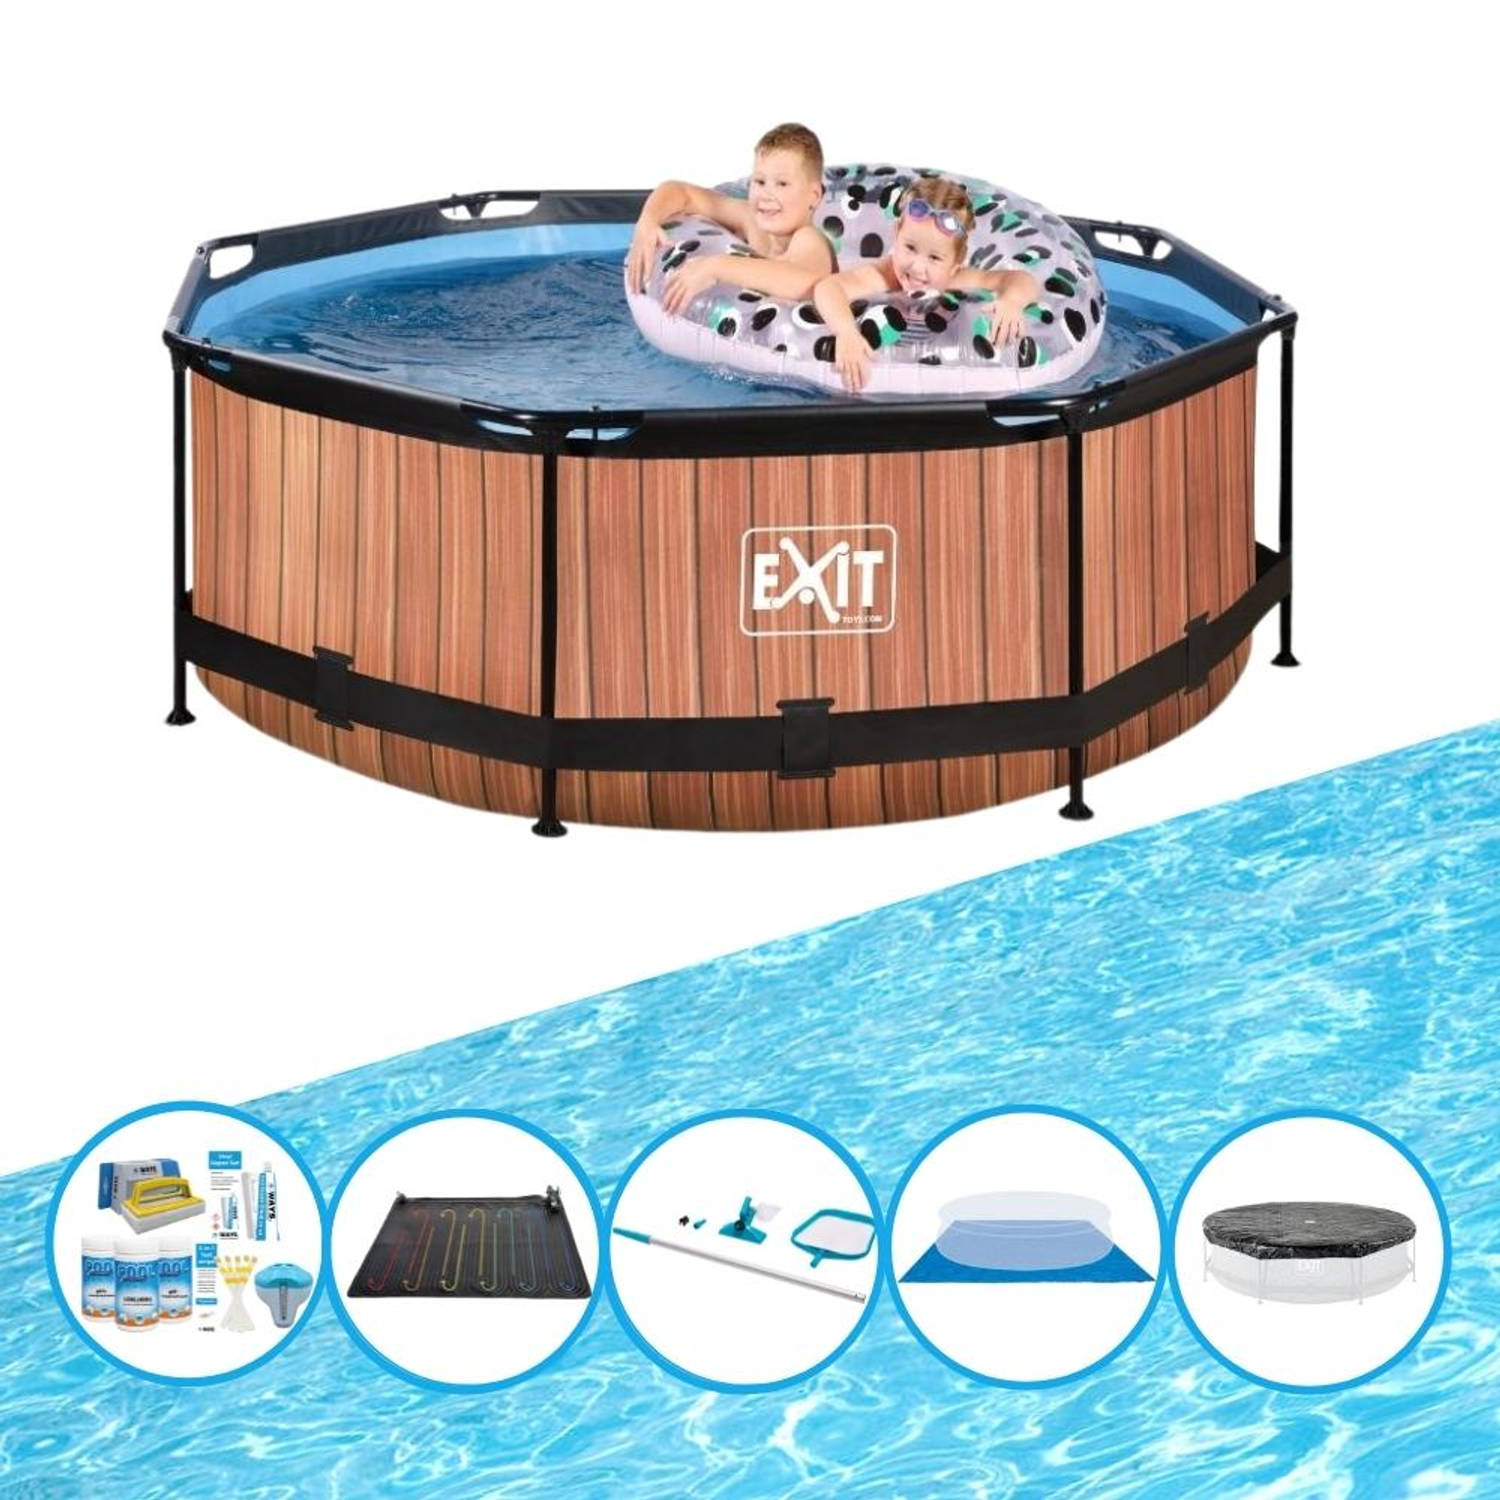 EXIT Zwembad Timber Style - Frame Pool ø244x76cm - Inclusief accessoires